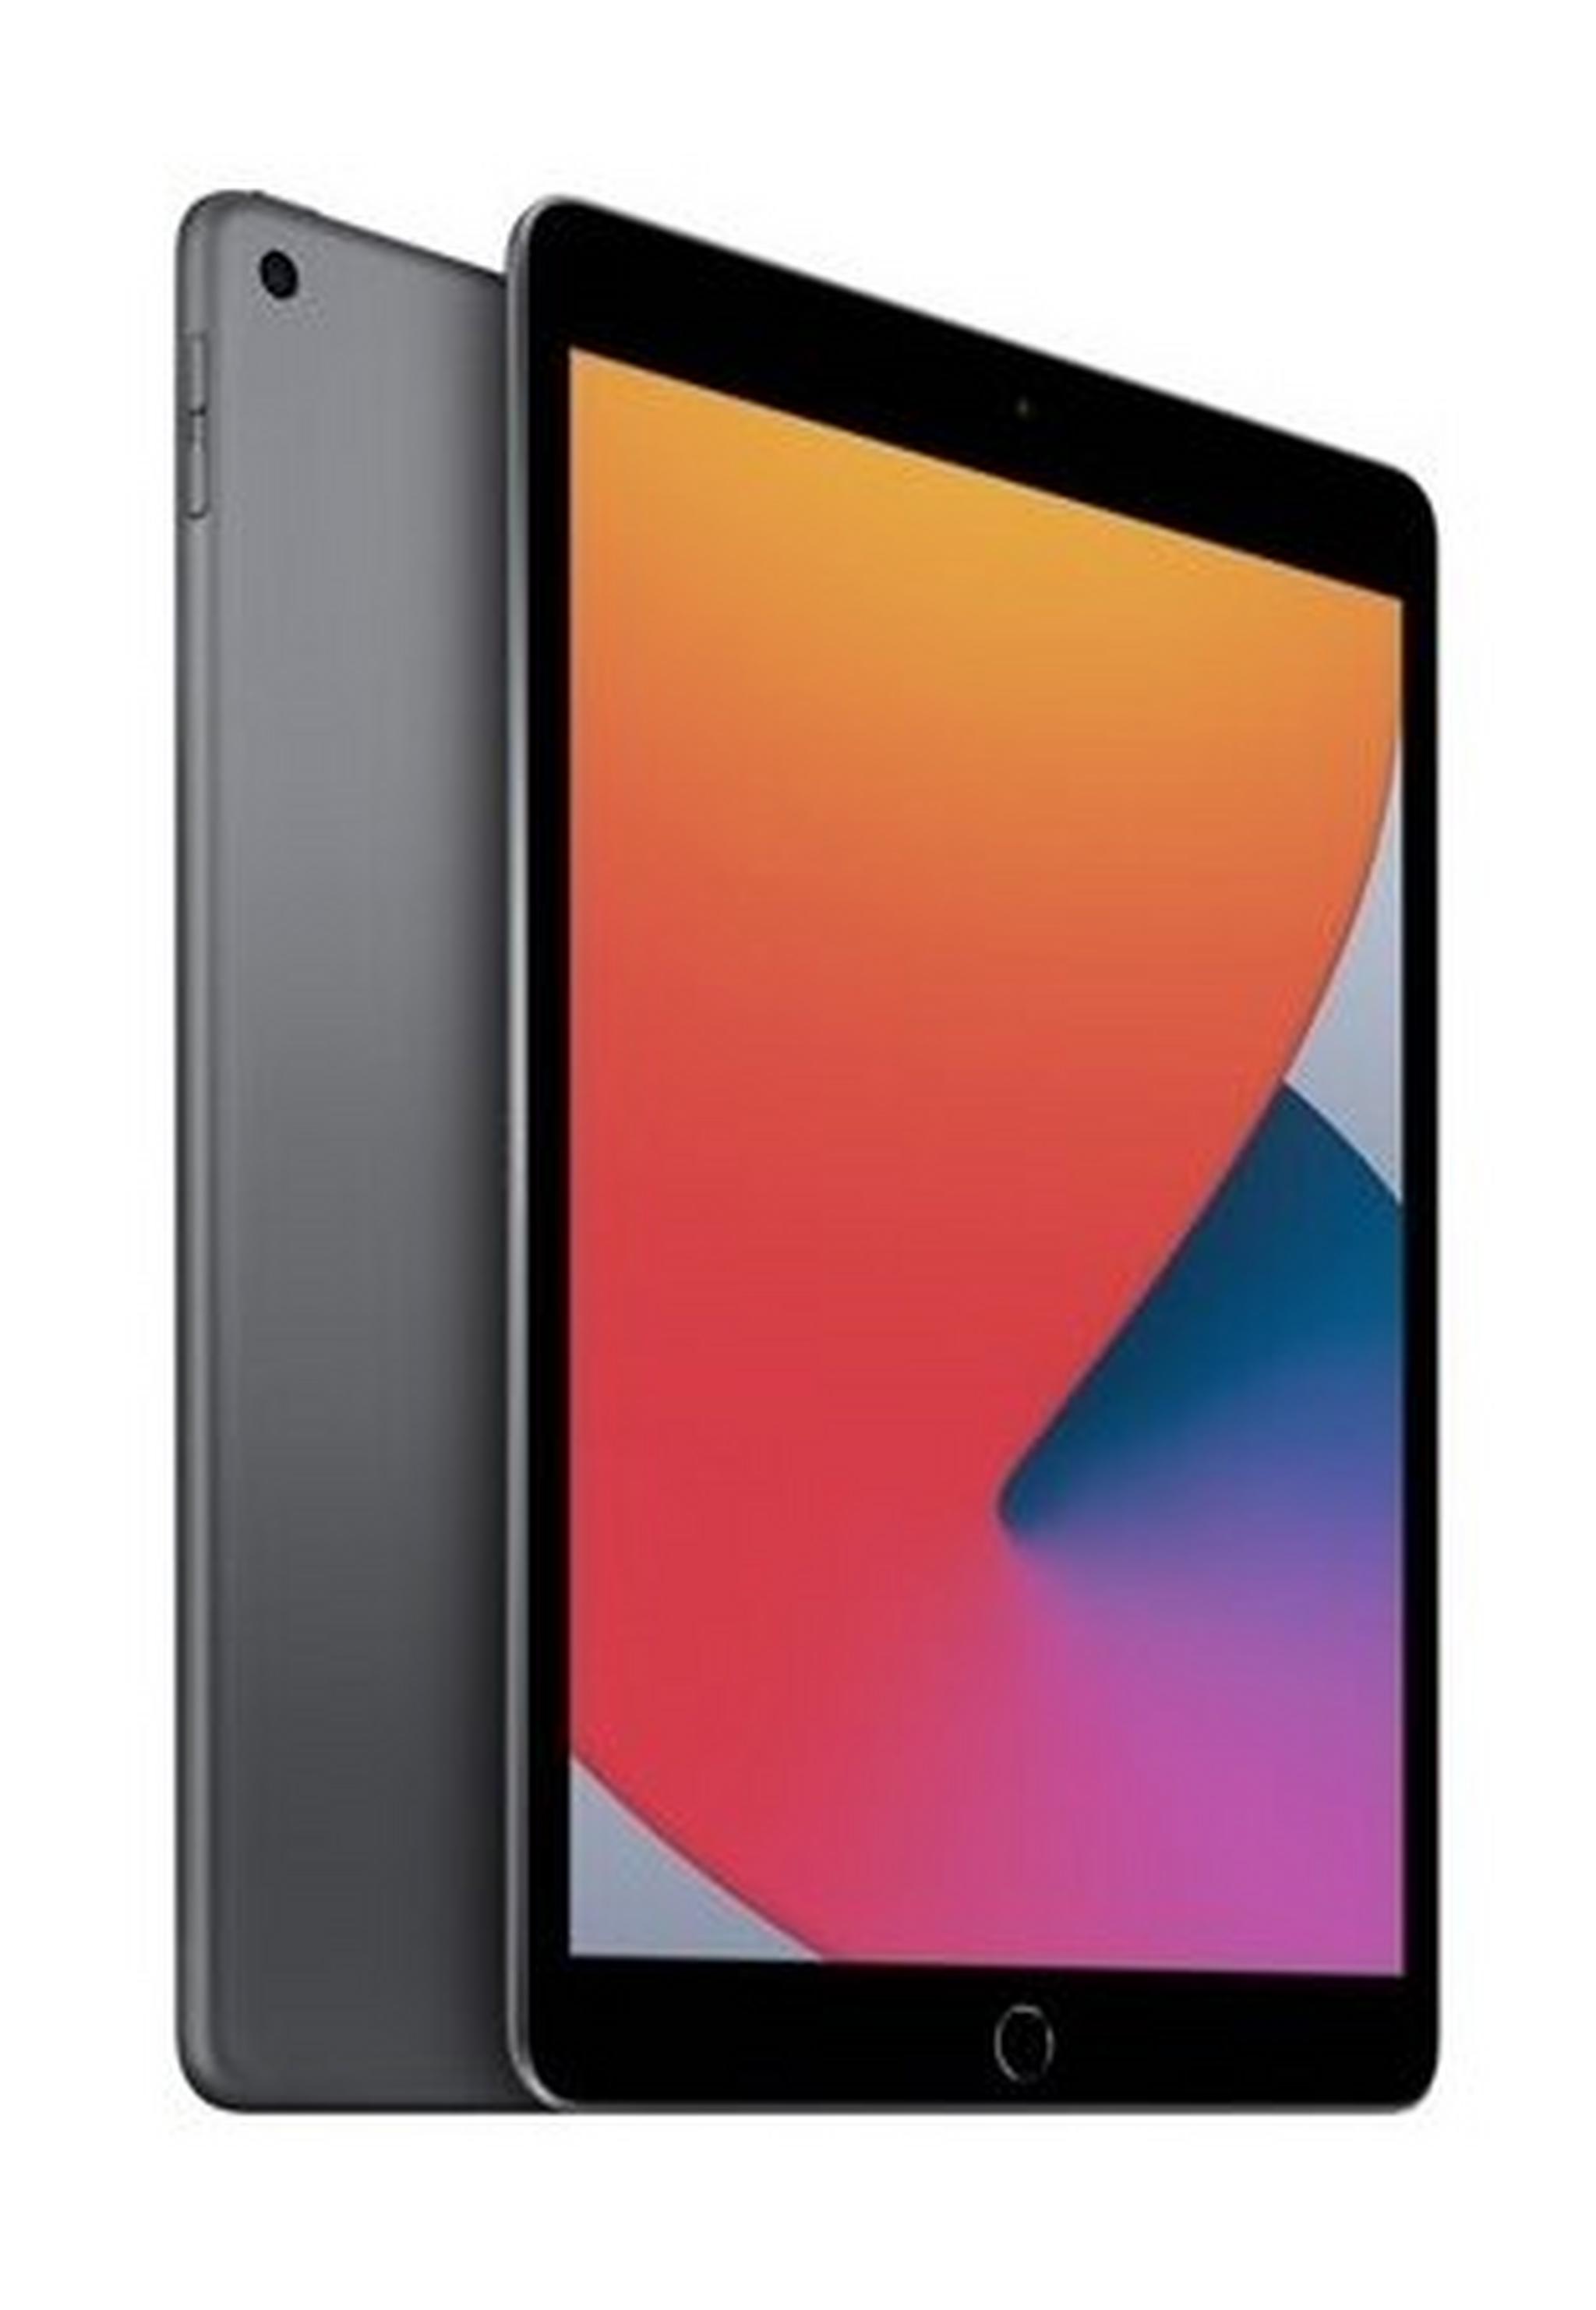 Apple iPad 7 10.2-inch 128GB Wi-Fi Only Tablet - Space Grey